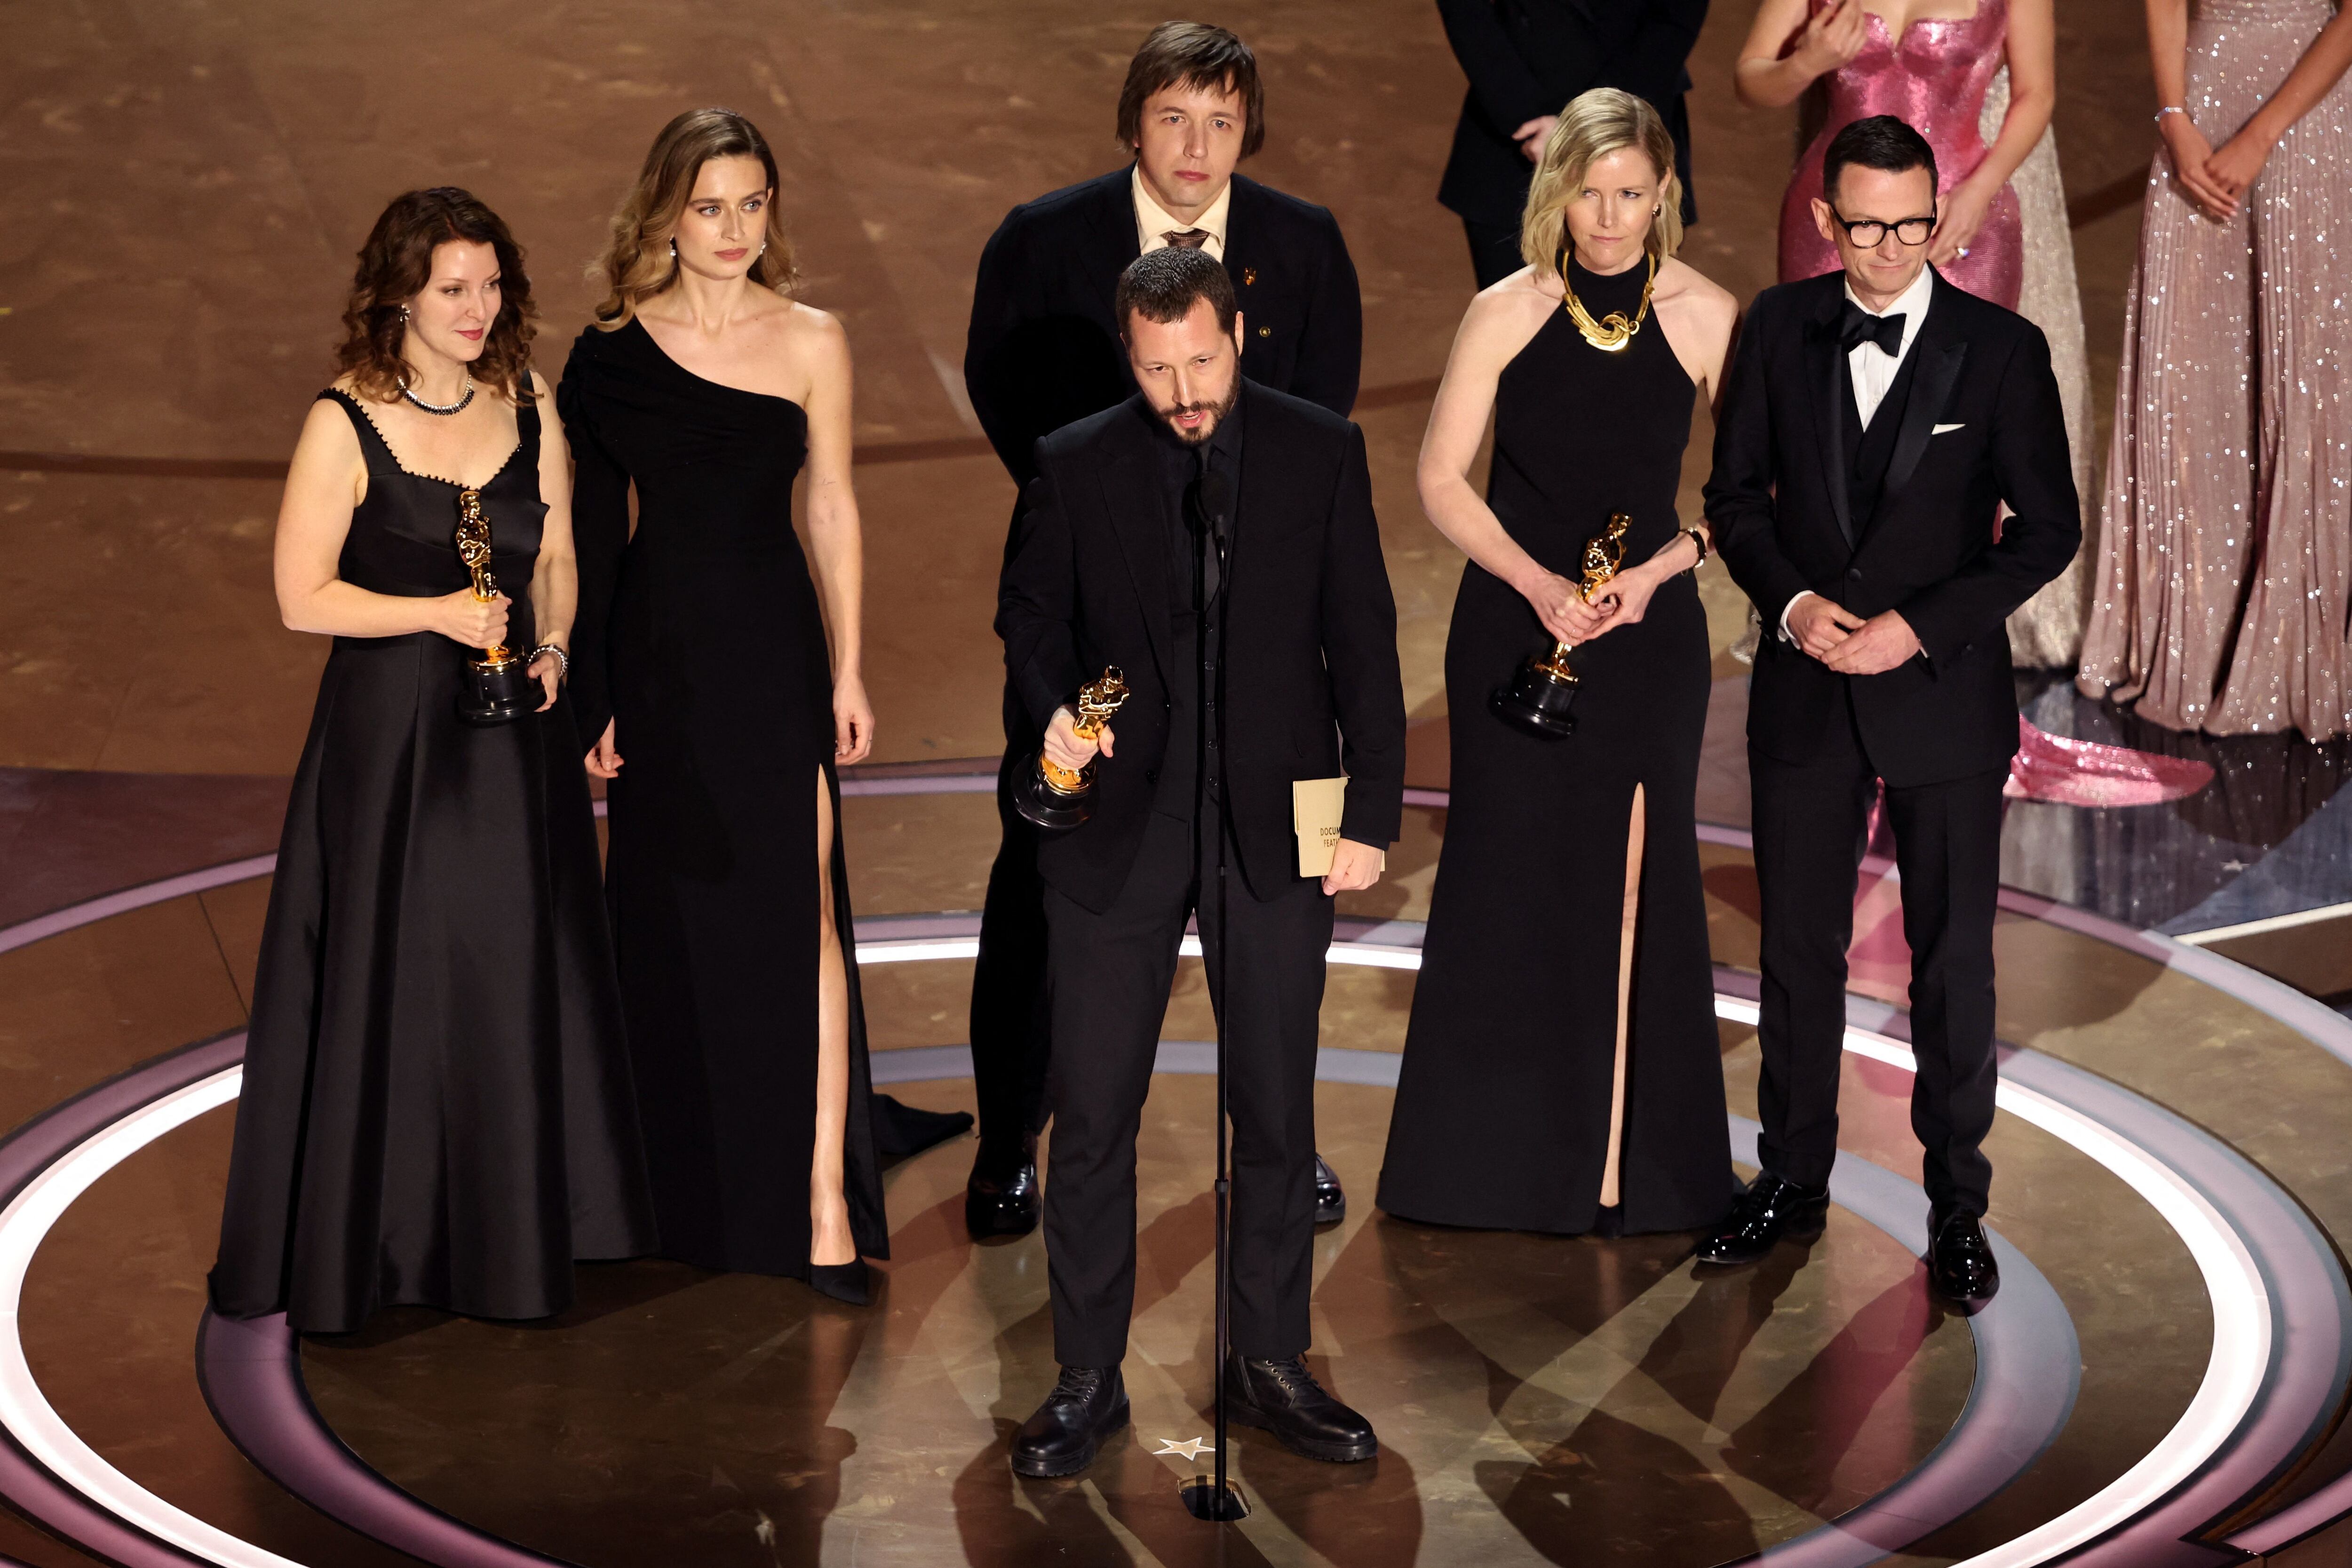 Director Mstyslav Chernov and producers Michelle Mizner and Raney Aronson-Rath win the Oscar for Best Documentary Feature Film for "20 Days in Mariupol" during the Oscars show at the 96th Academy Awards in Hollywood, Los Angeles, California, U.S., March 10, 2024. REUTERS/Mike Blake